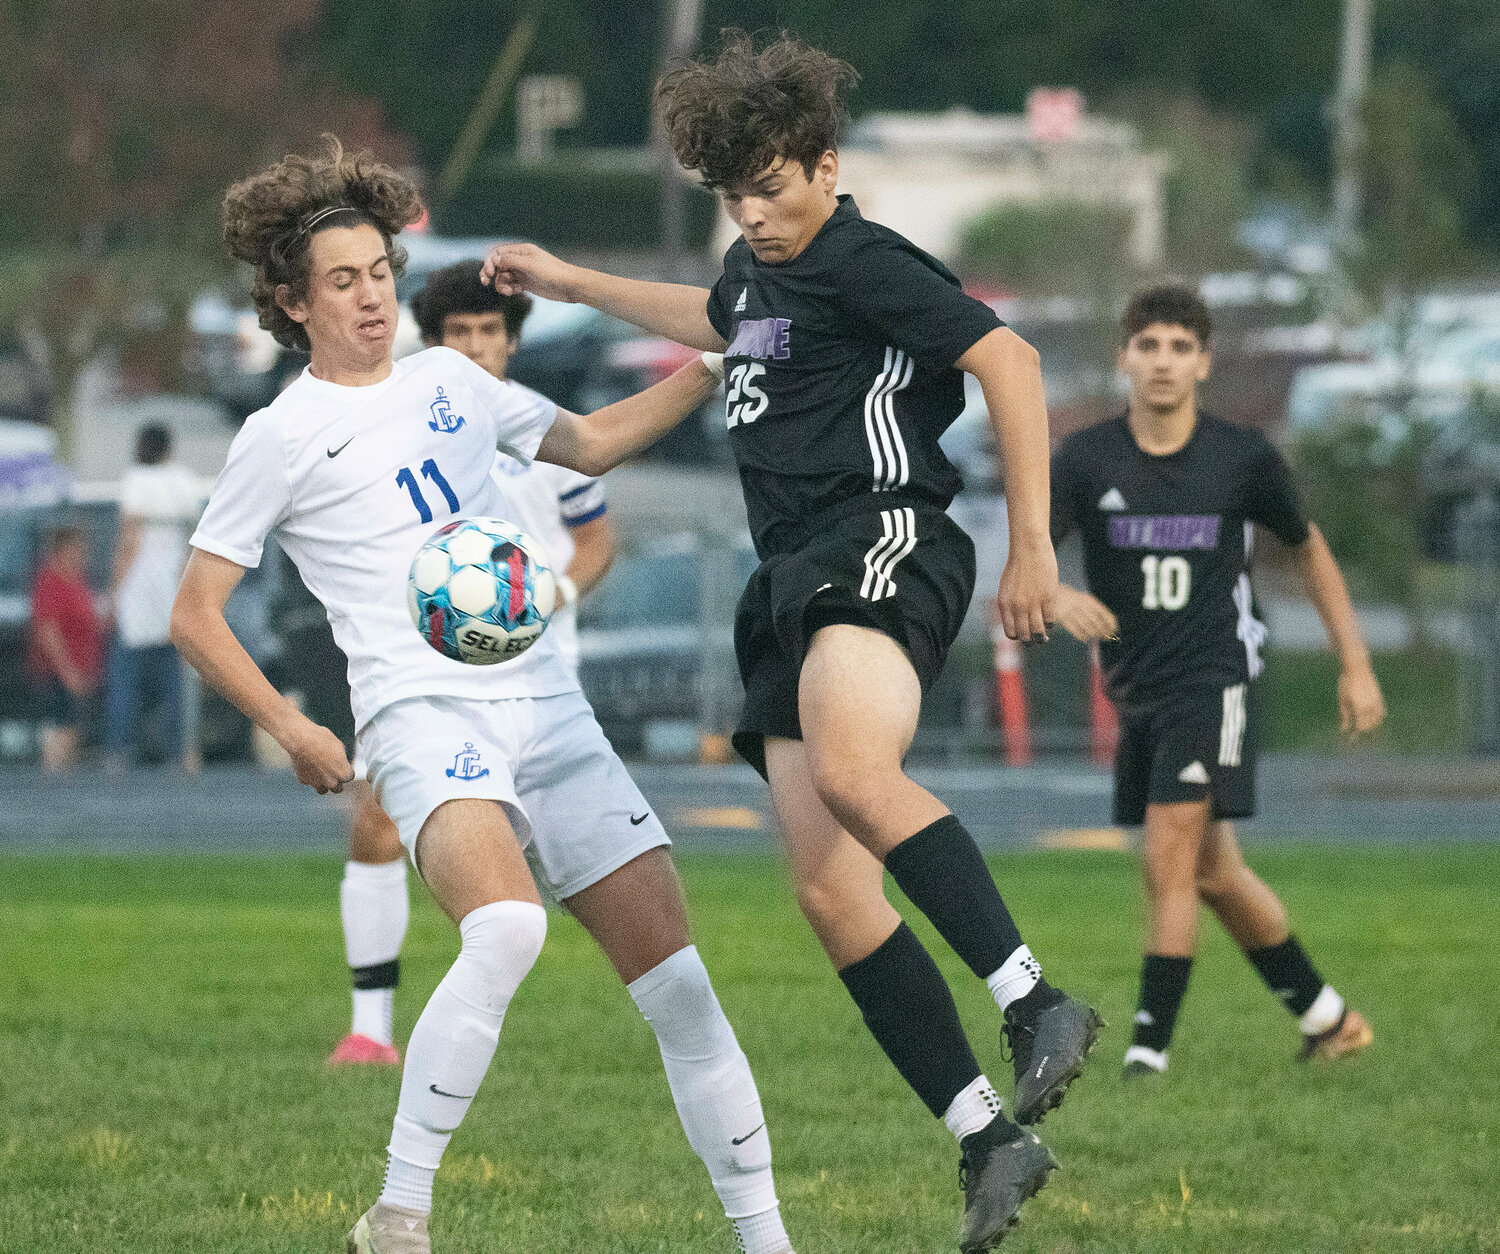 Midfielder Dylan DeOliveira thwarts a Cumberland attack during the Huskies 1-0 loss to the Skippers on Wednesday night.